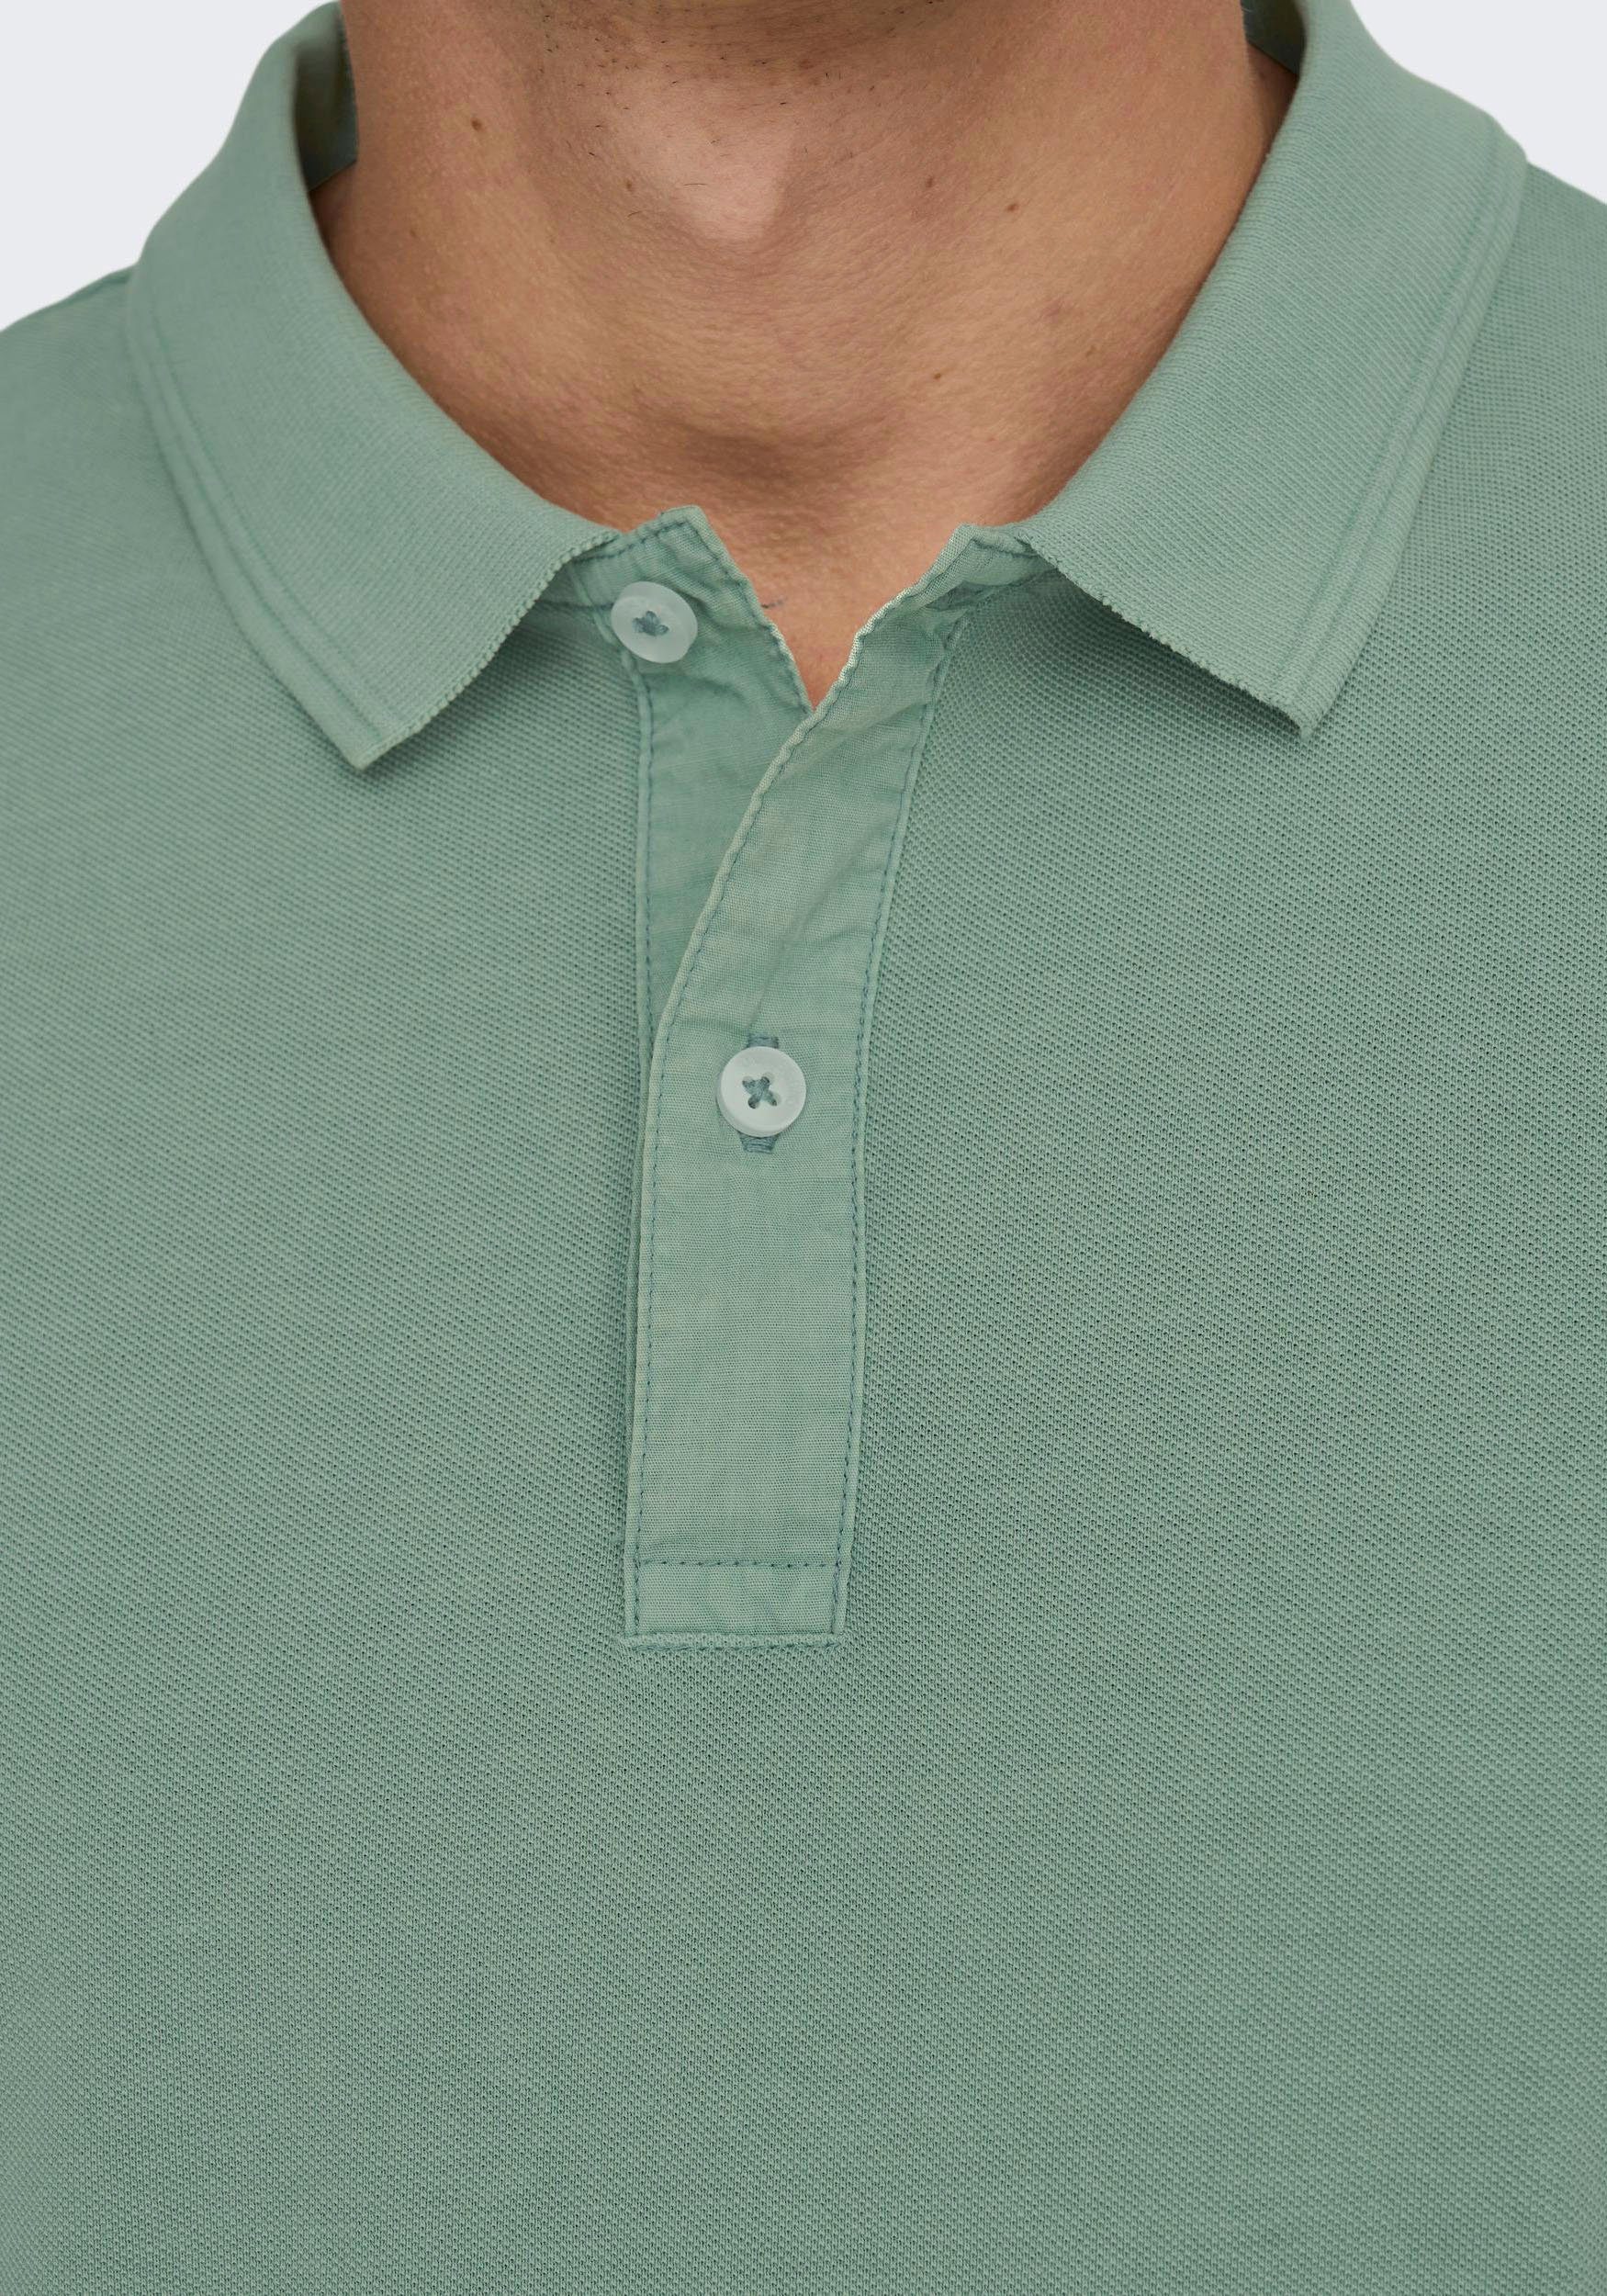 SONS Polo chinois ONLY TRAVIS & green Poloshirt